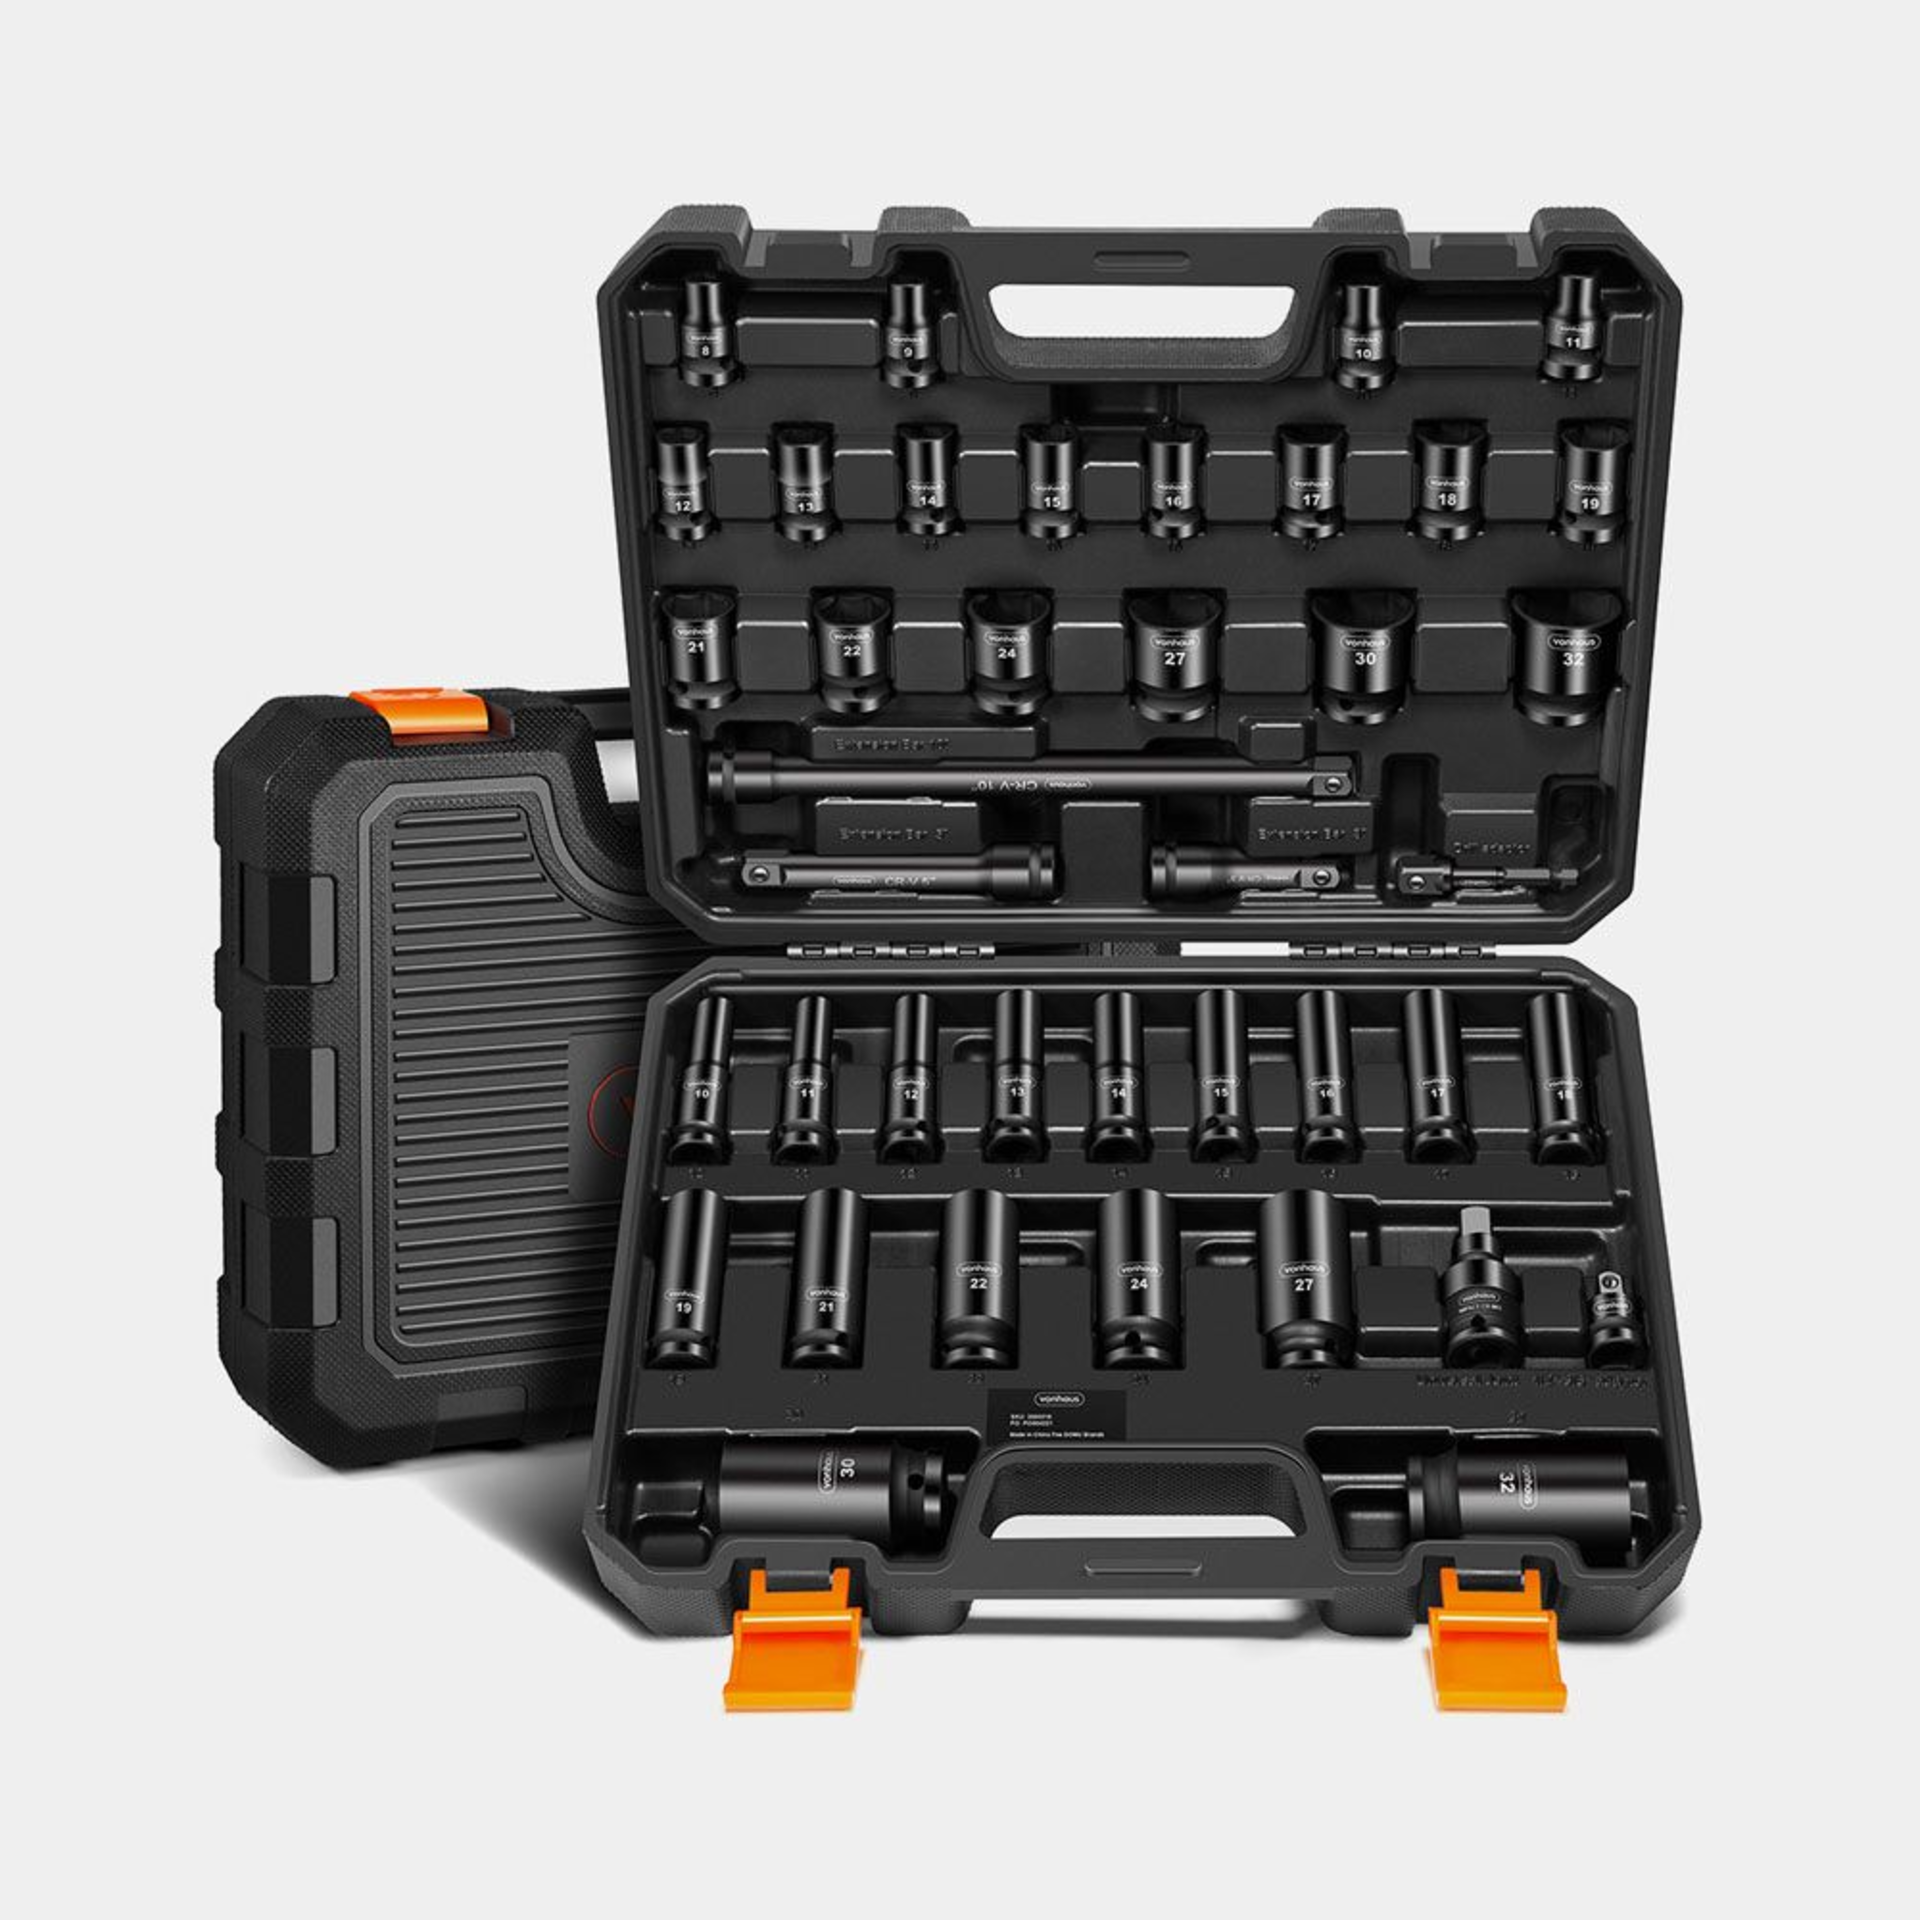 40Pc Impact Socket Set. Shop our complete 40PC Impact Socket Set today for a heavy-duty addition